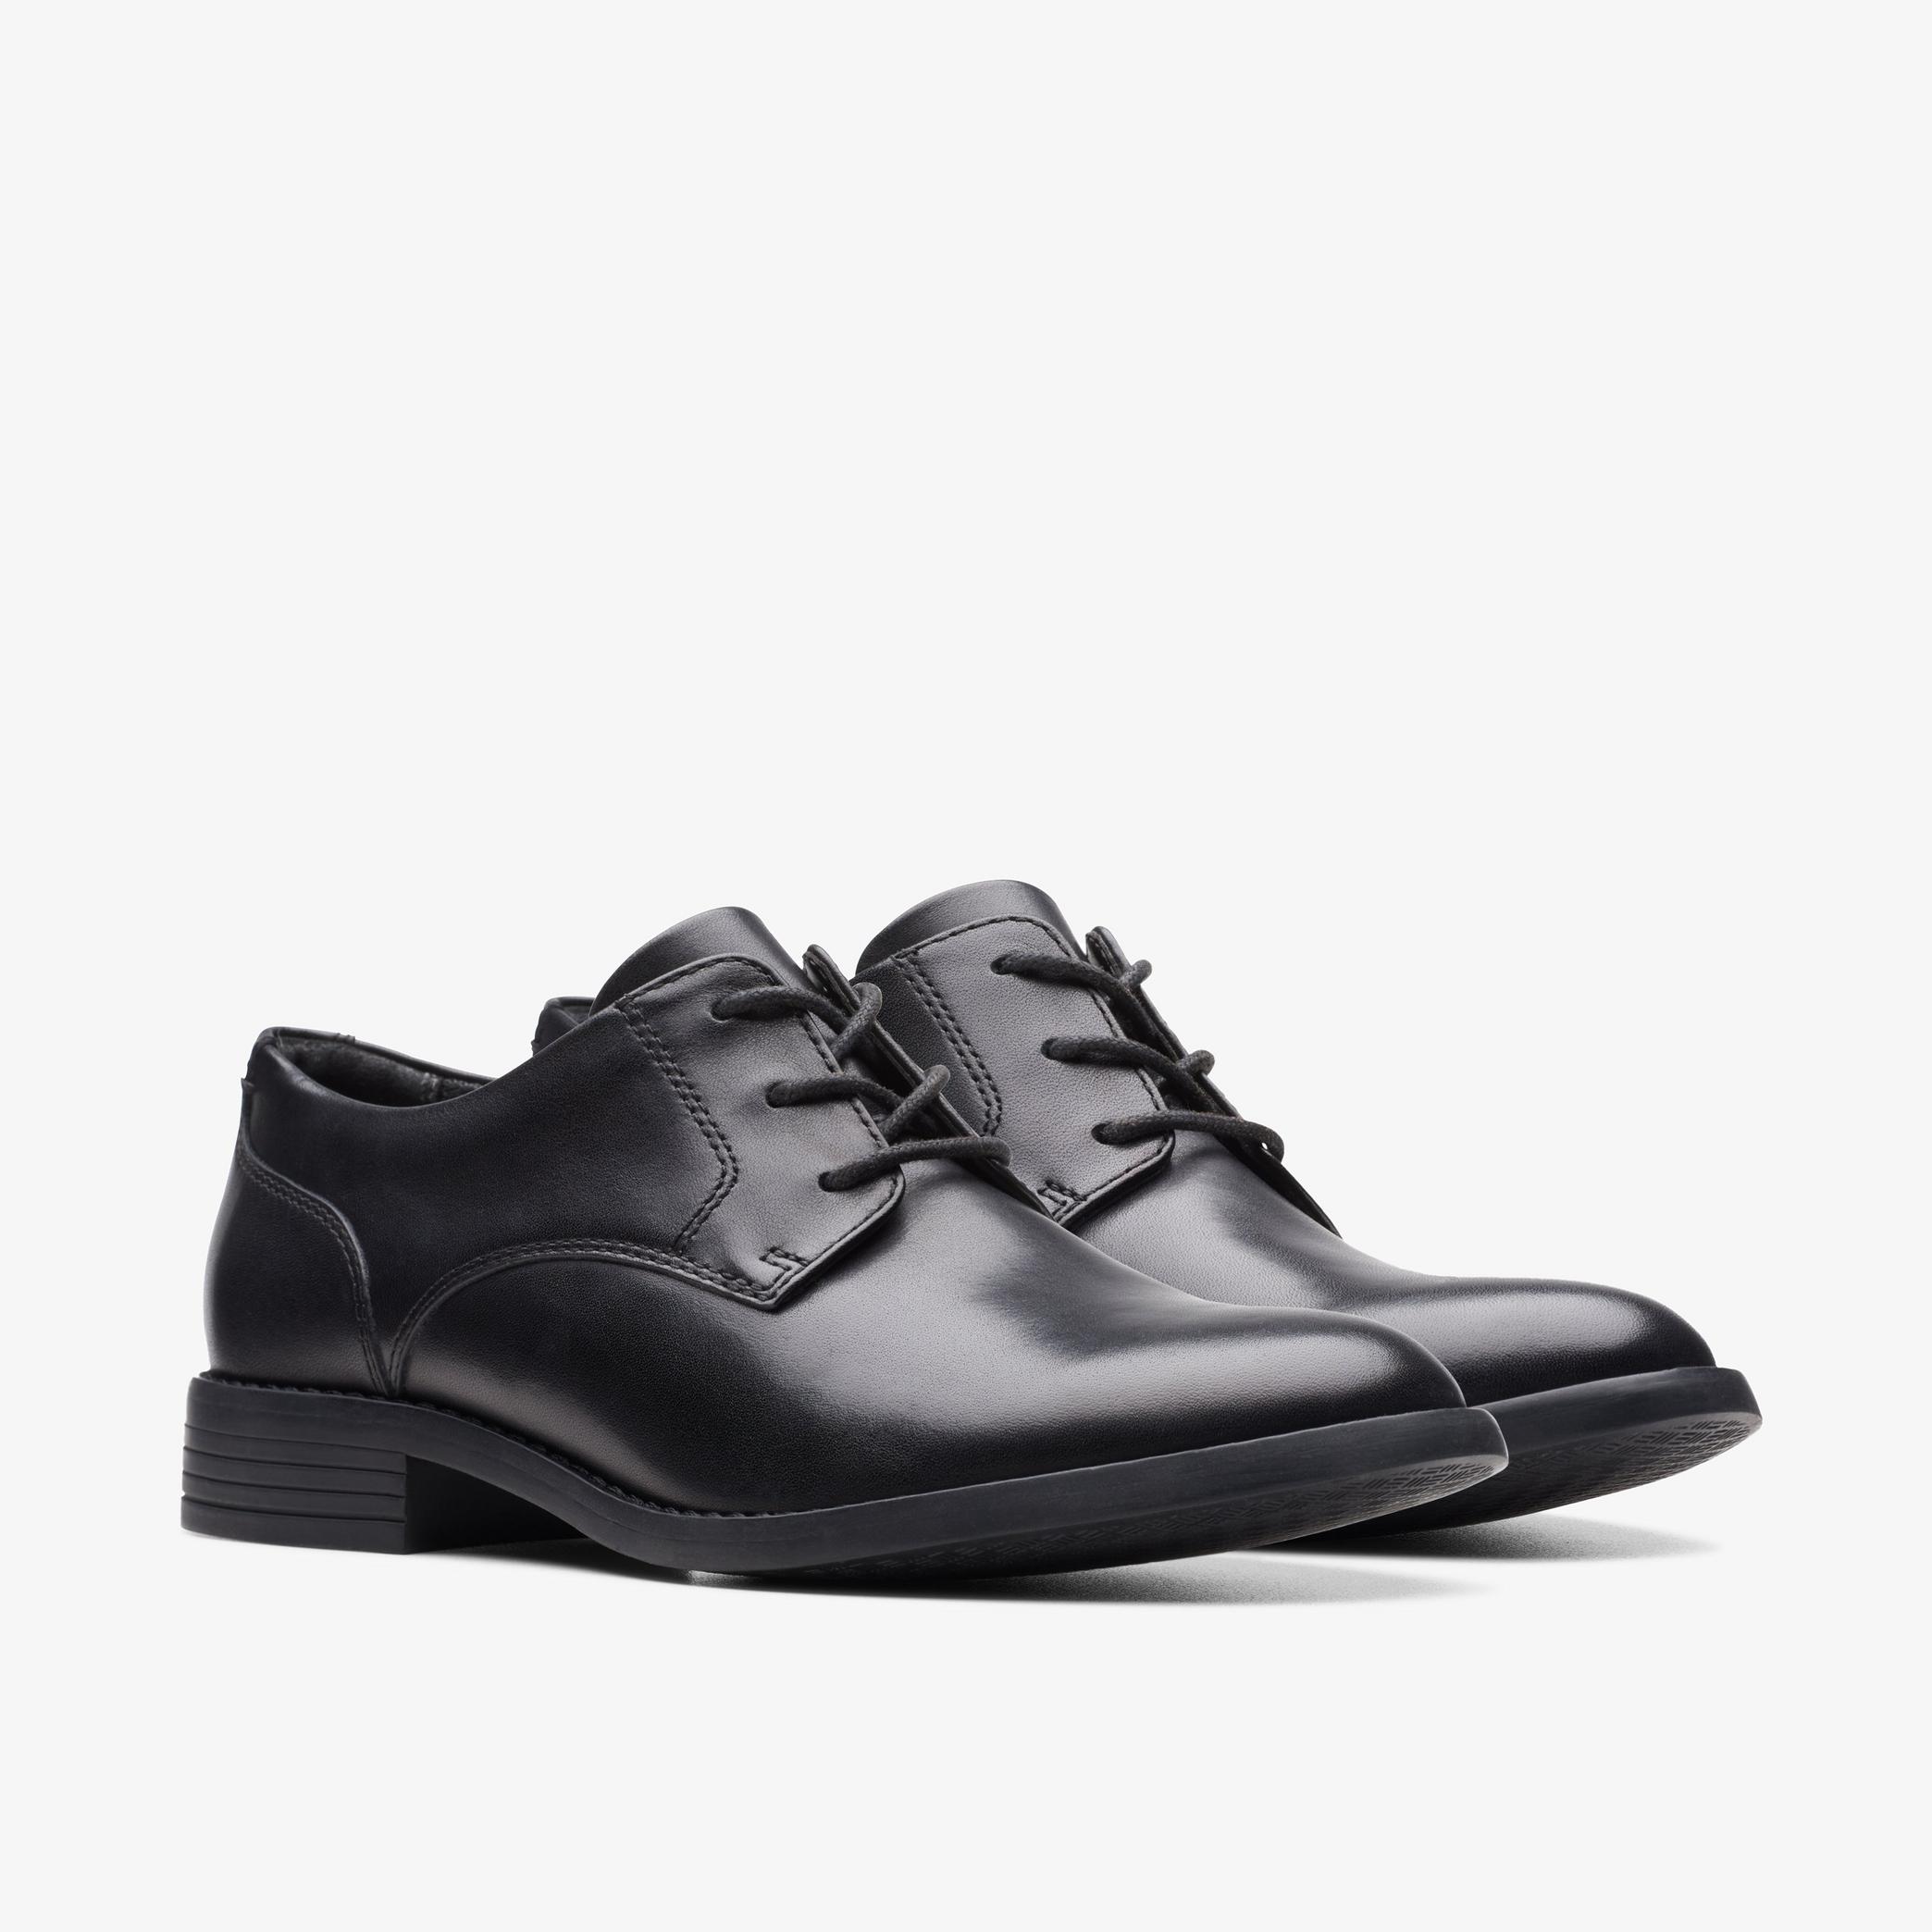 Camzin Iris Black Leather Derby Shoes, view 4 of 6